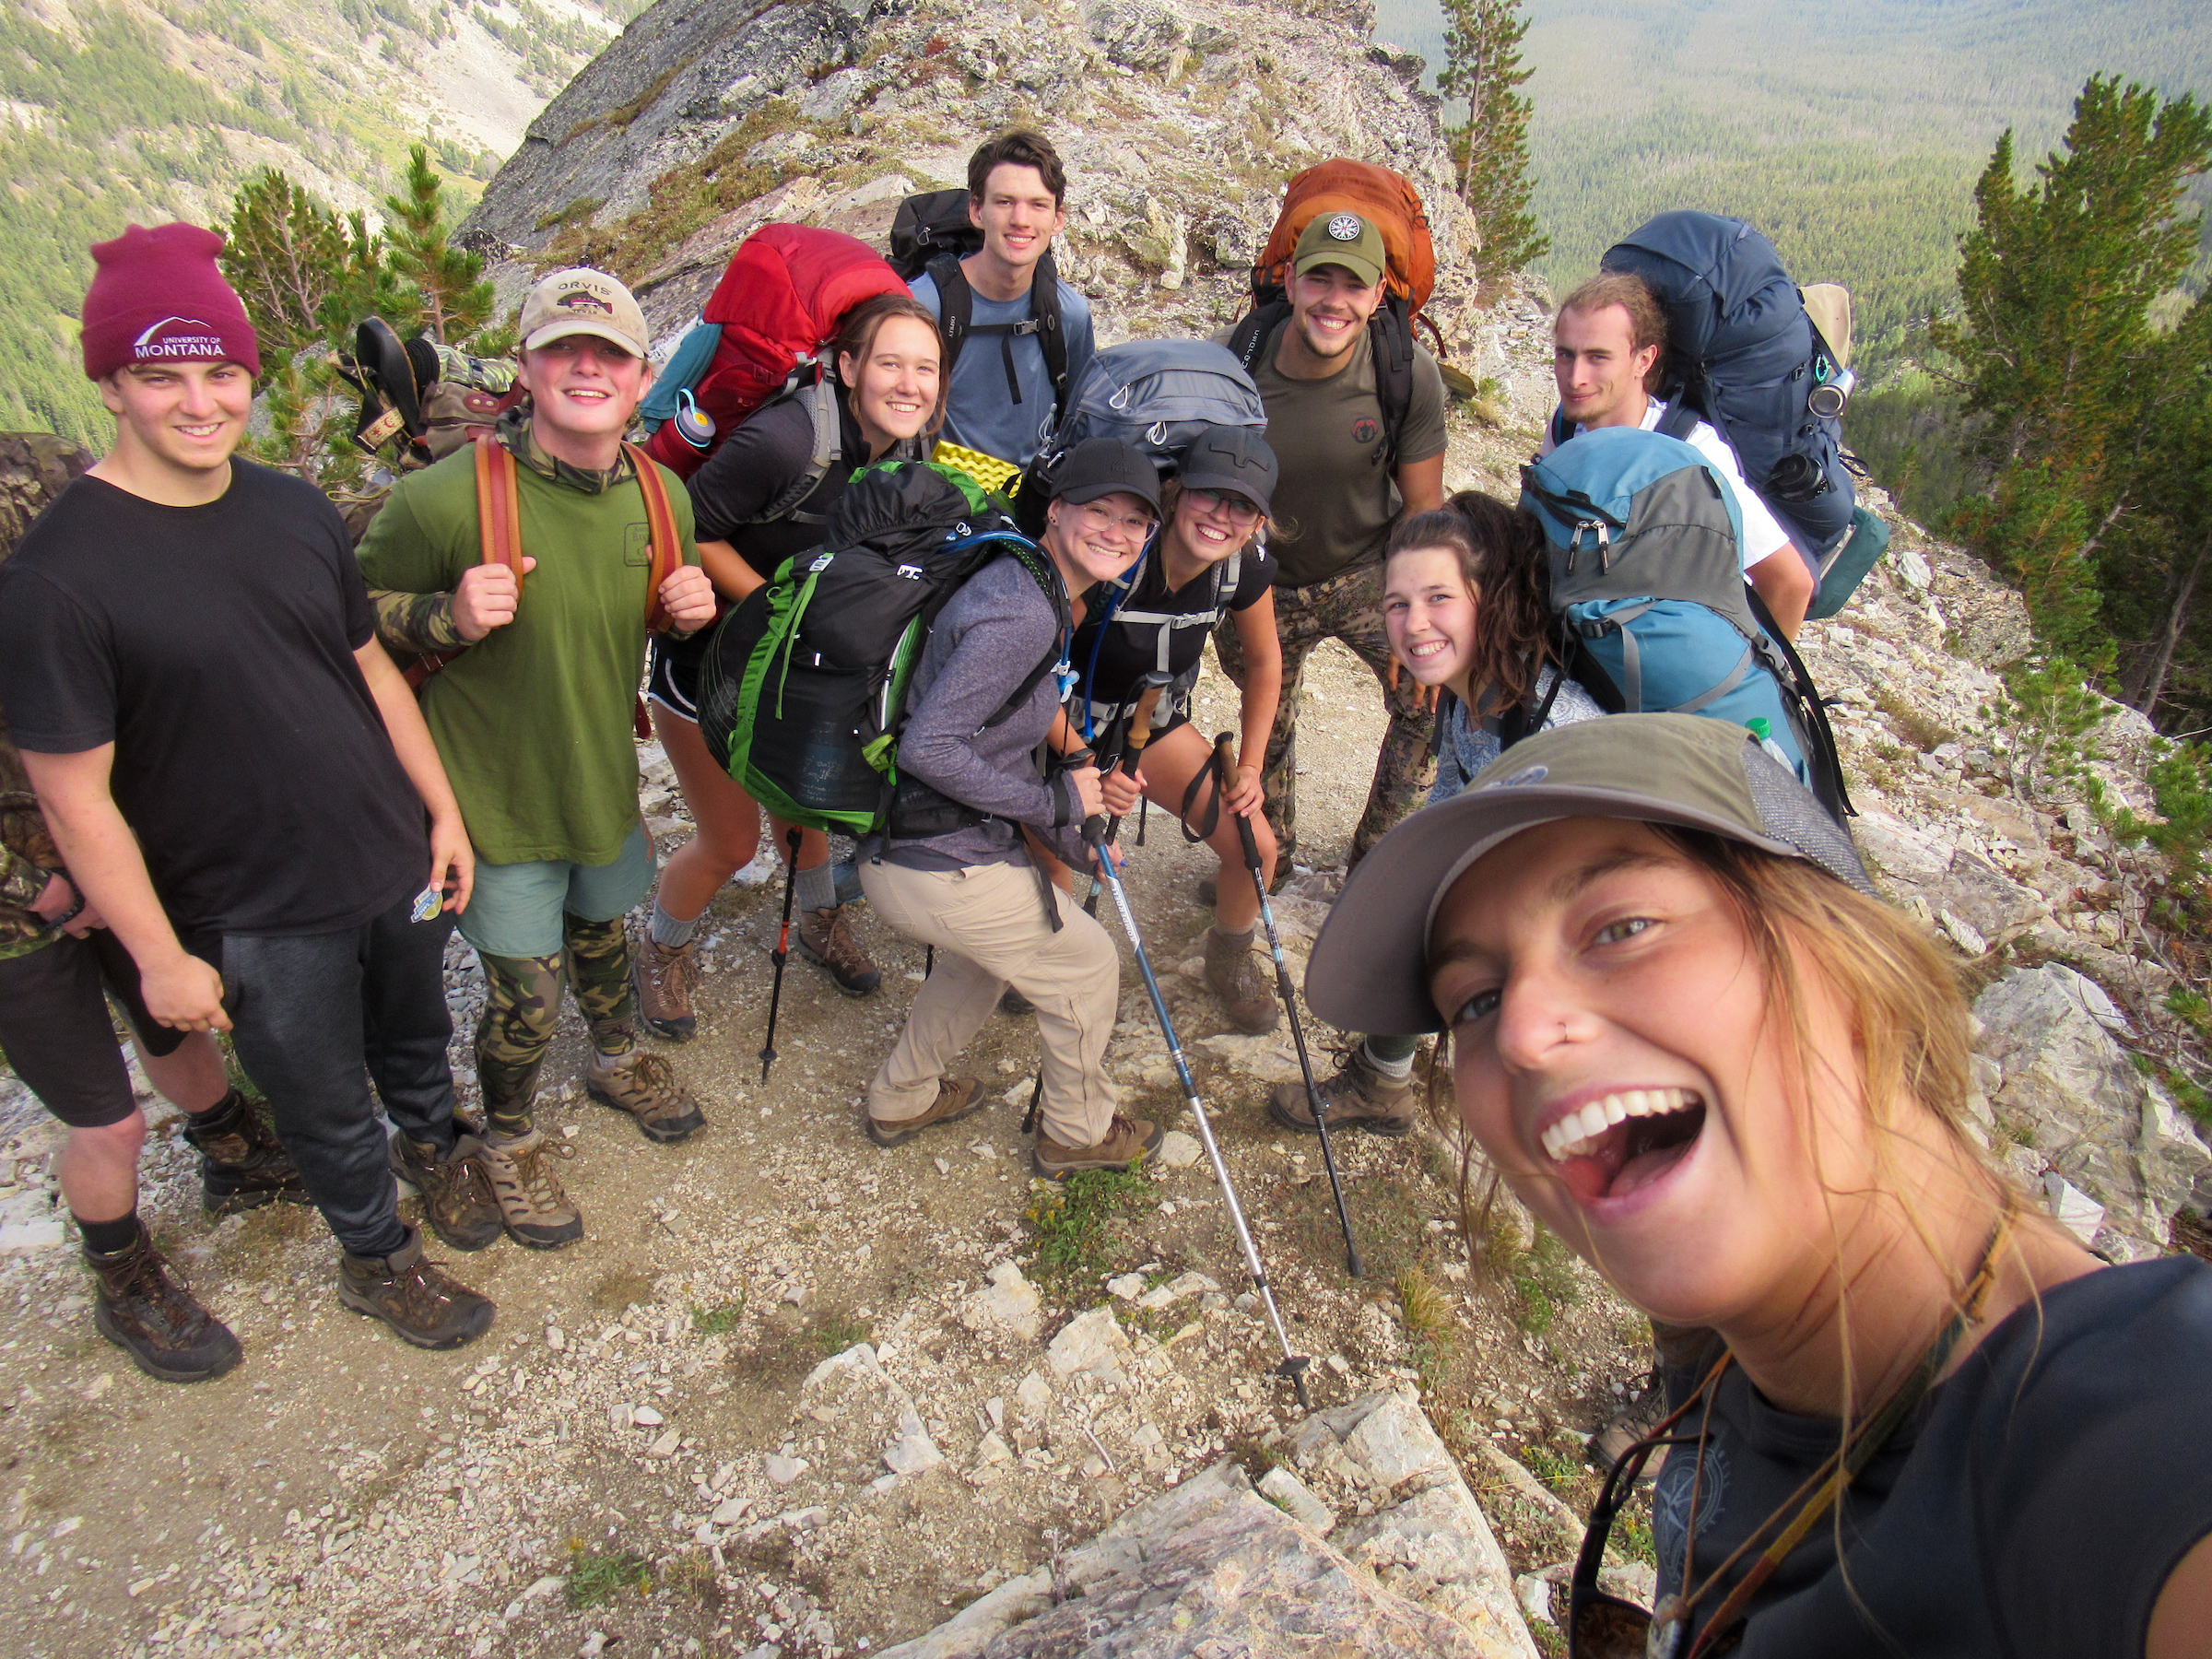 Students gathered on a mountain summit give a thumbs up 